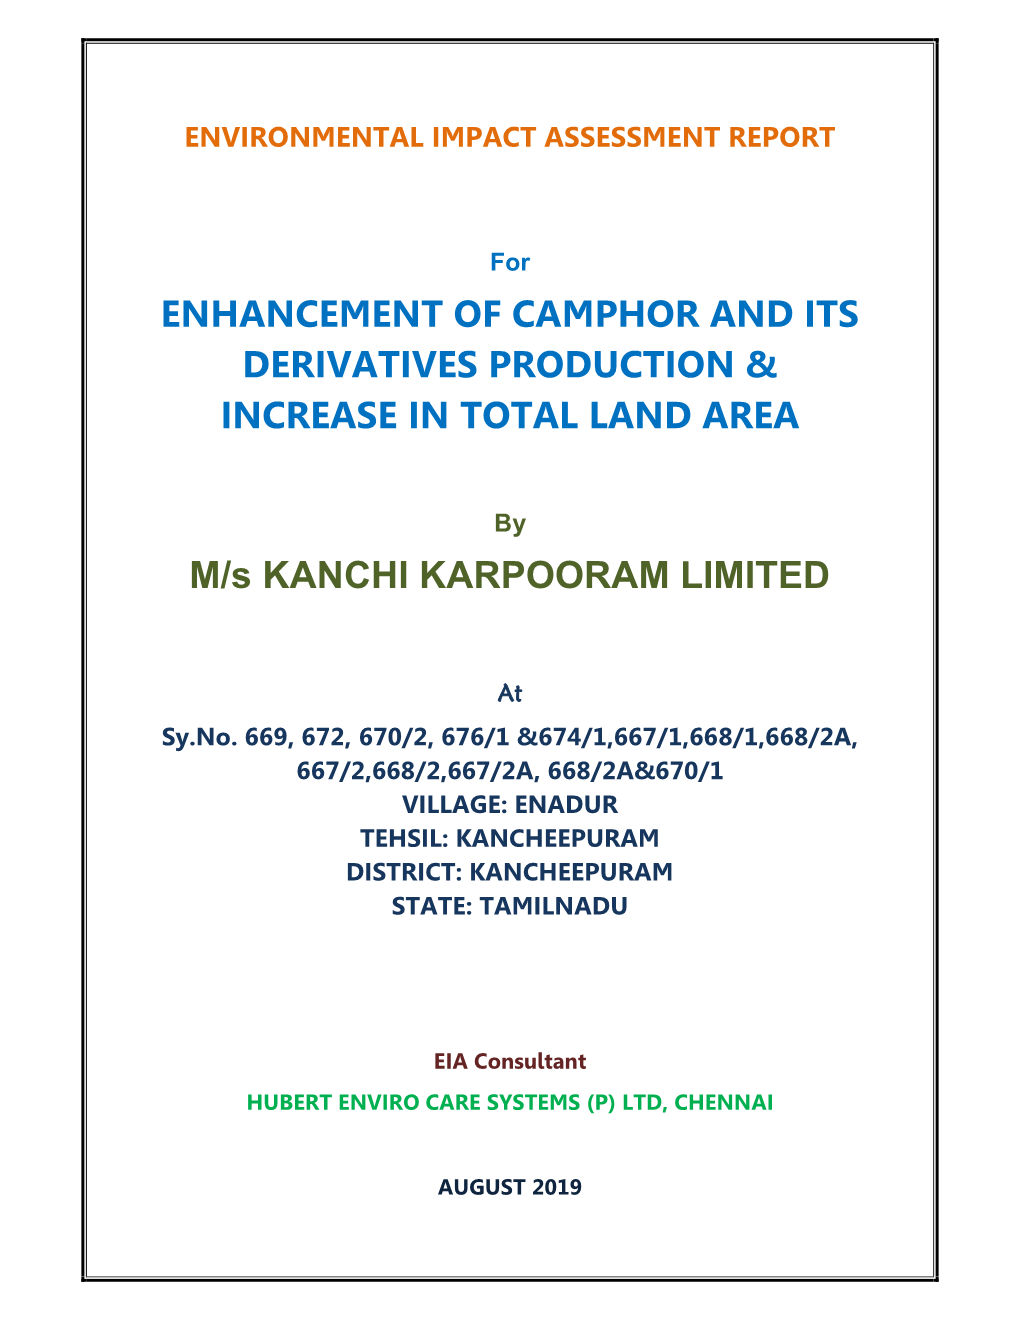 Enhancement of Camphor and Its Derivatives Production & Increase in Total Land Area